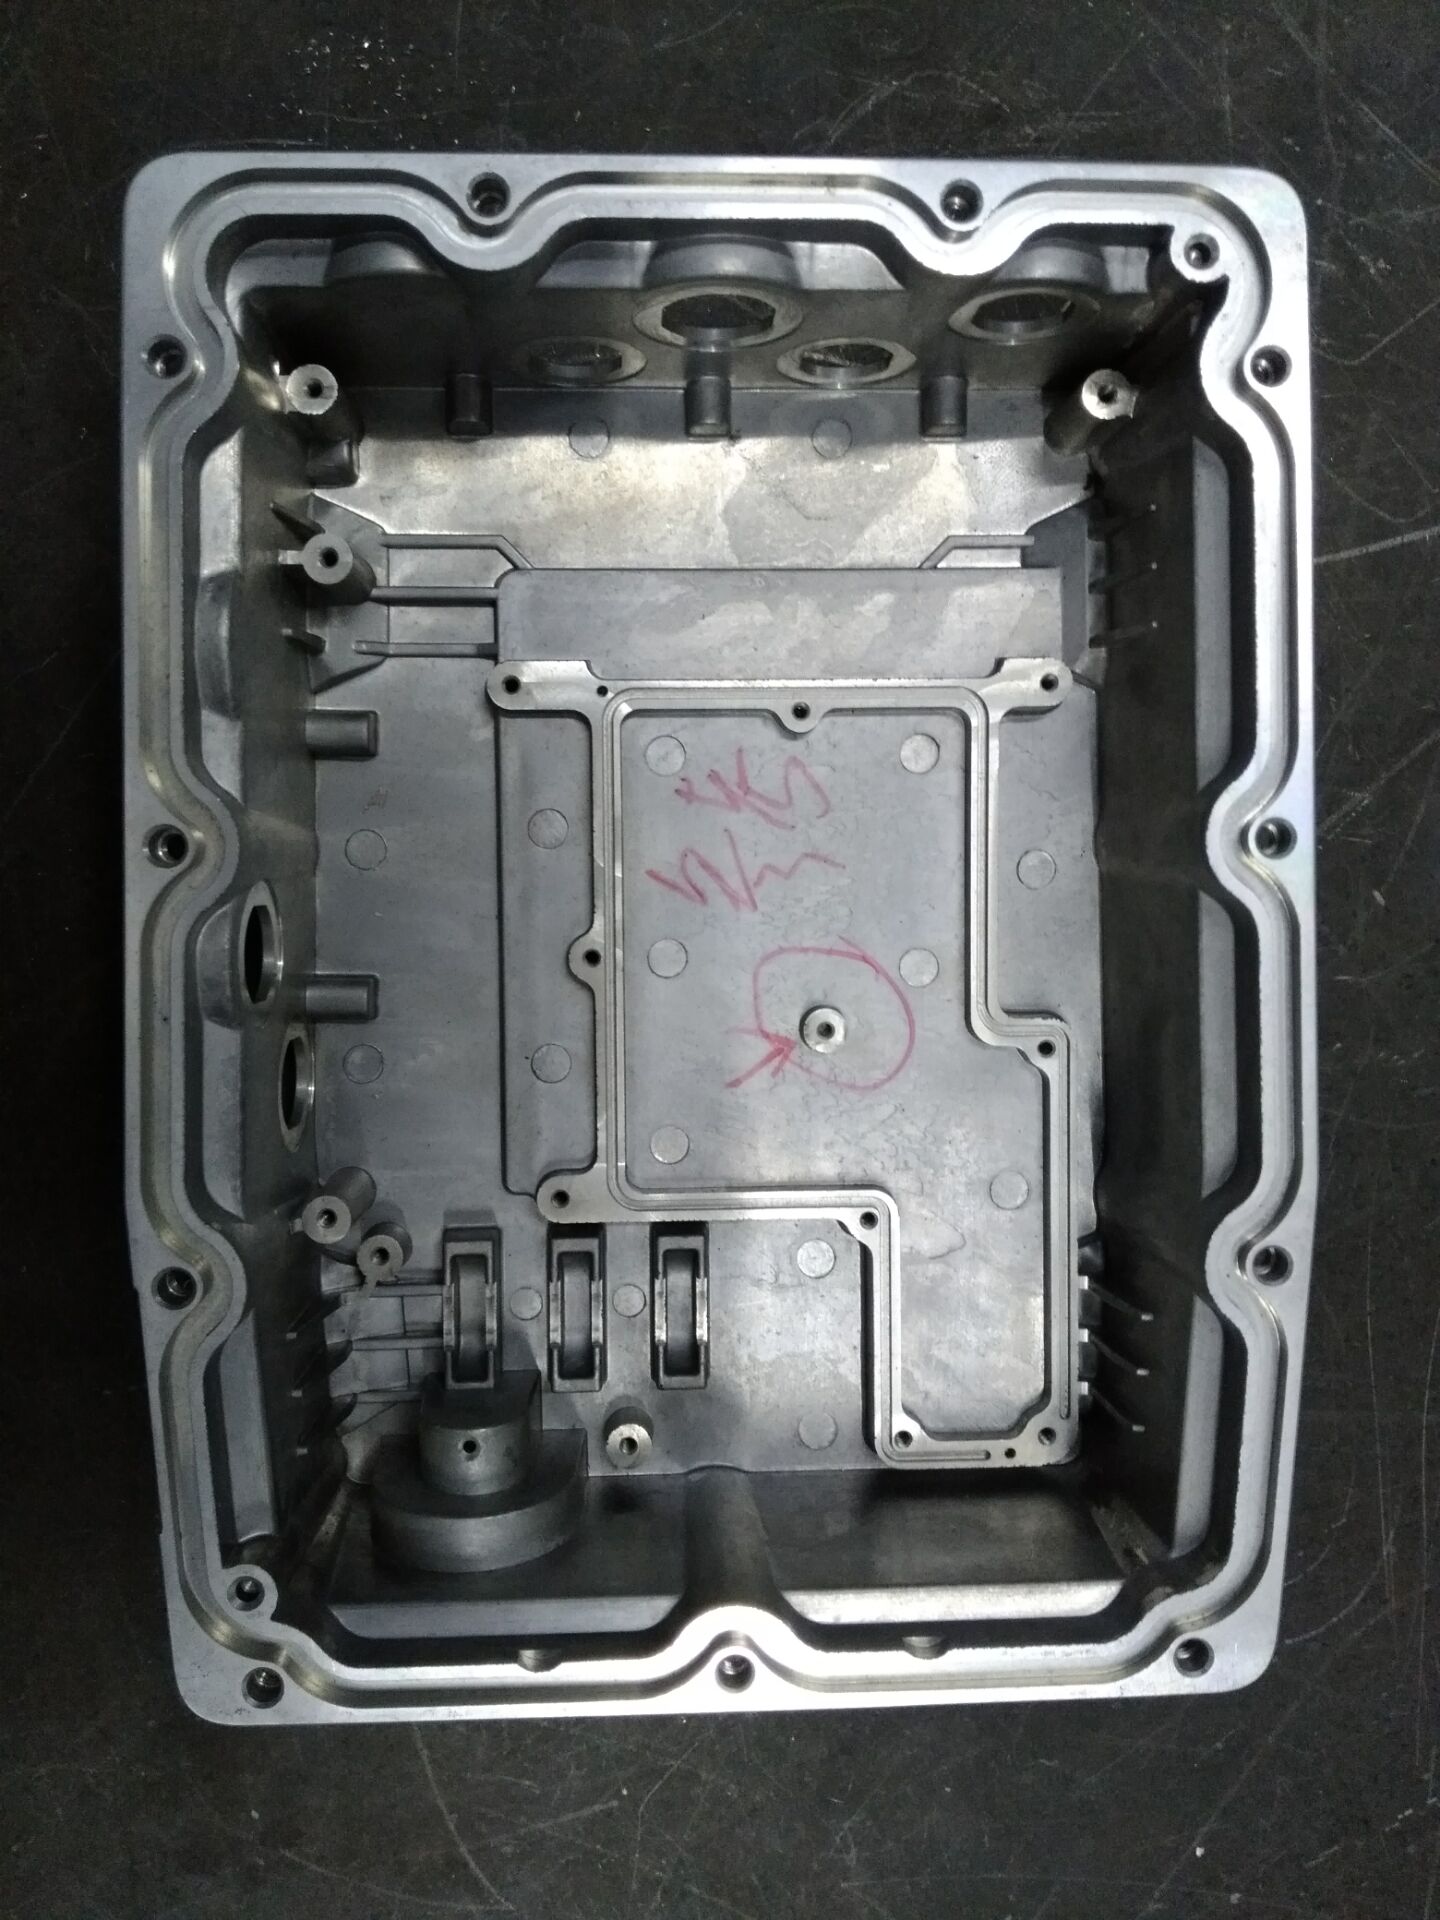 As a injection mold builders supplier,what type of mold can you make?